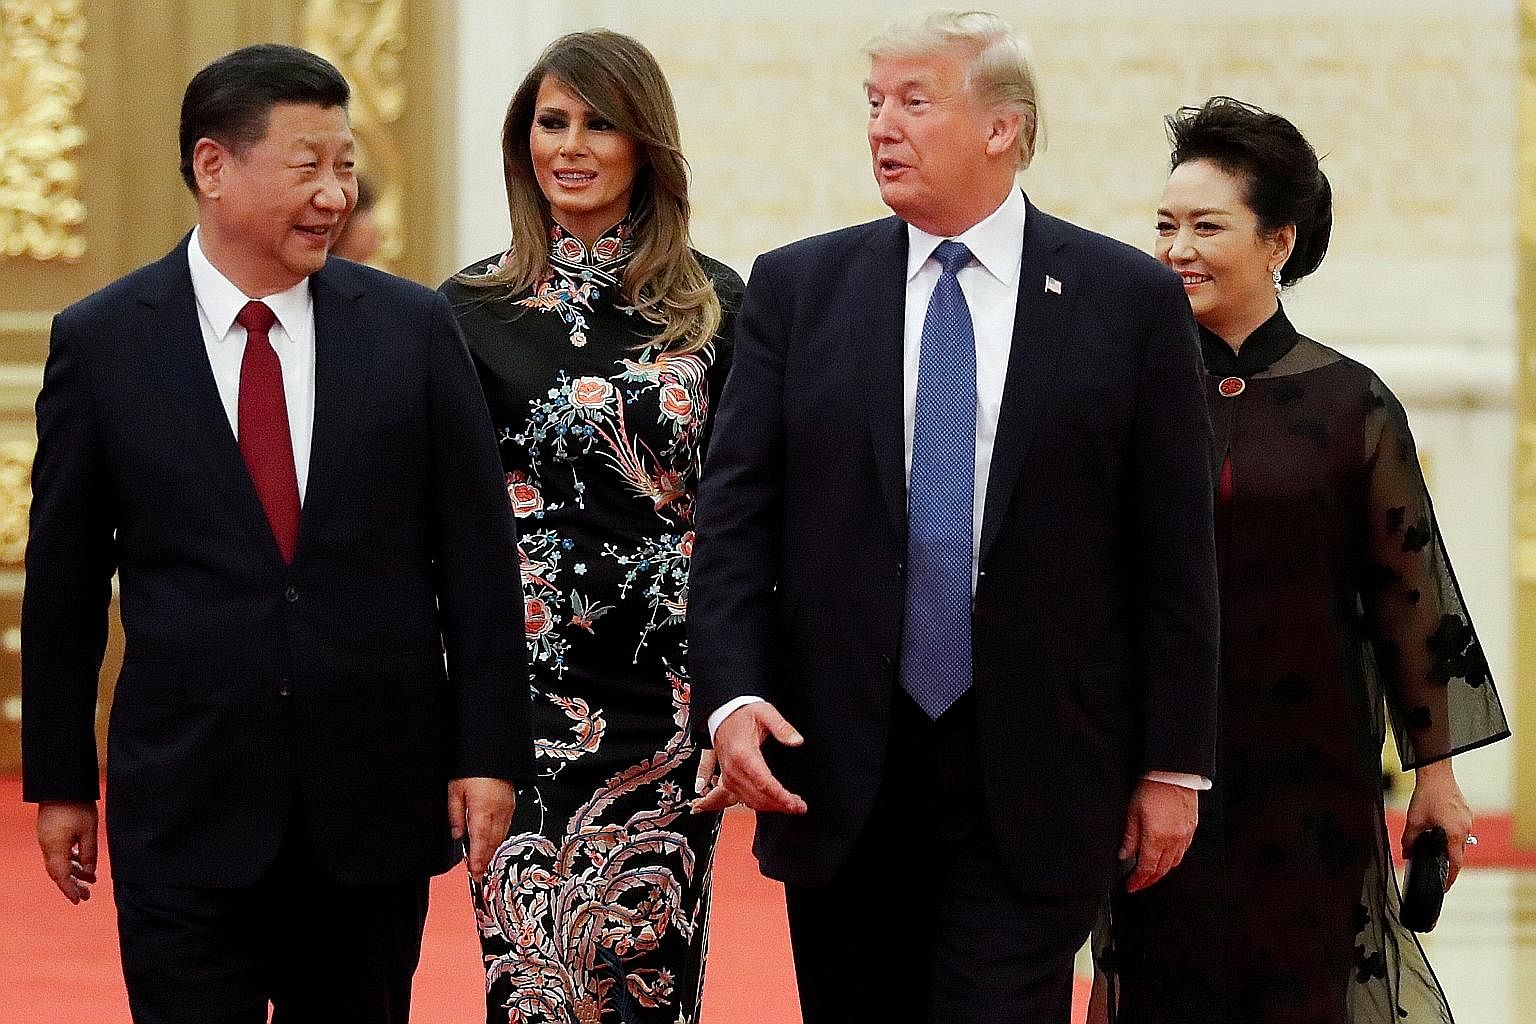 Above: US President Donald Trump and his wife Melania arriving for the state dinner with China's President Xi Jinping and First Lady Peng Liyuan at the Great Hall of the People in Beijing last November. Left: Mr Trump with (from far left) Vietnam Pri